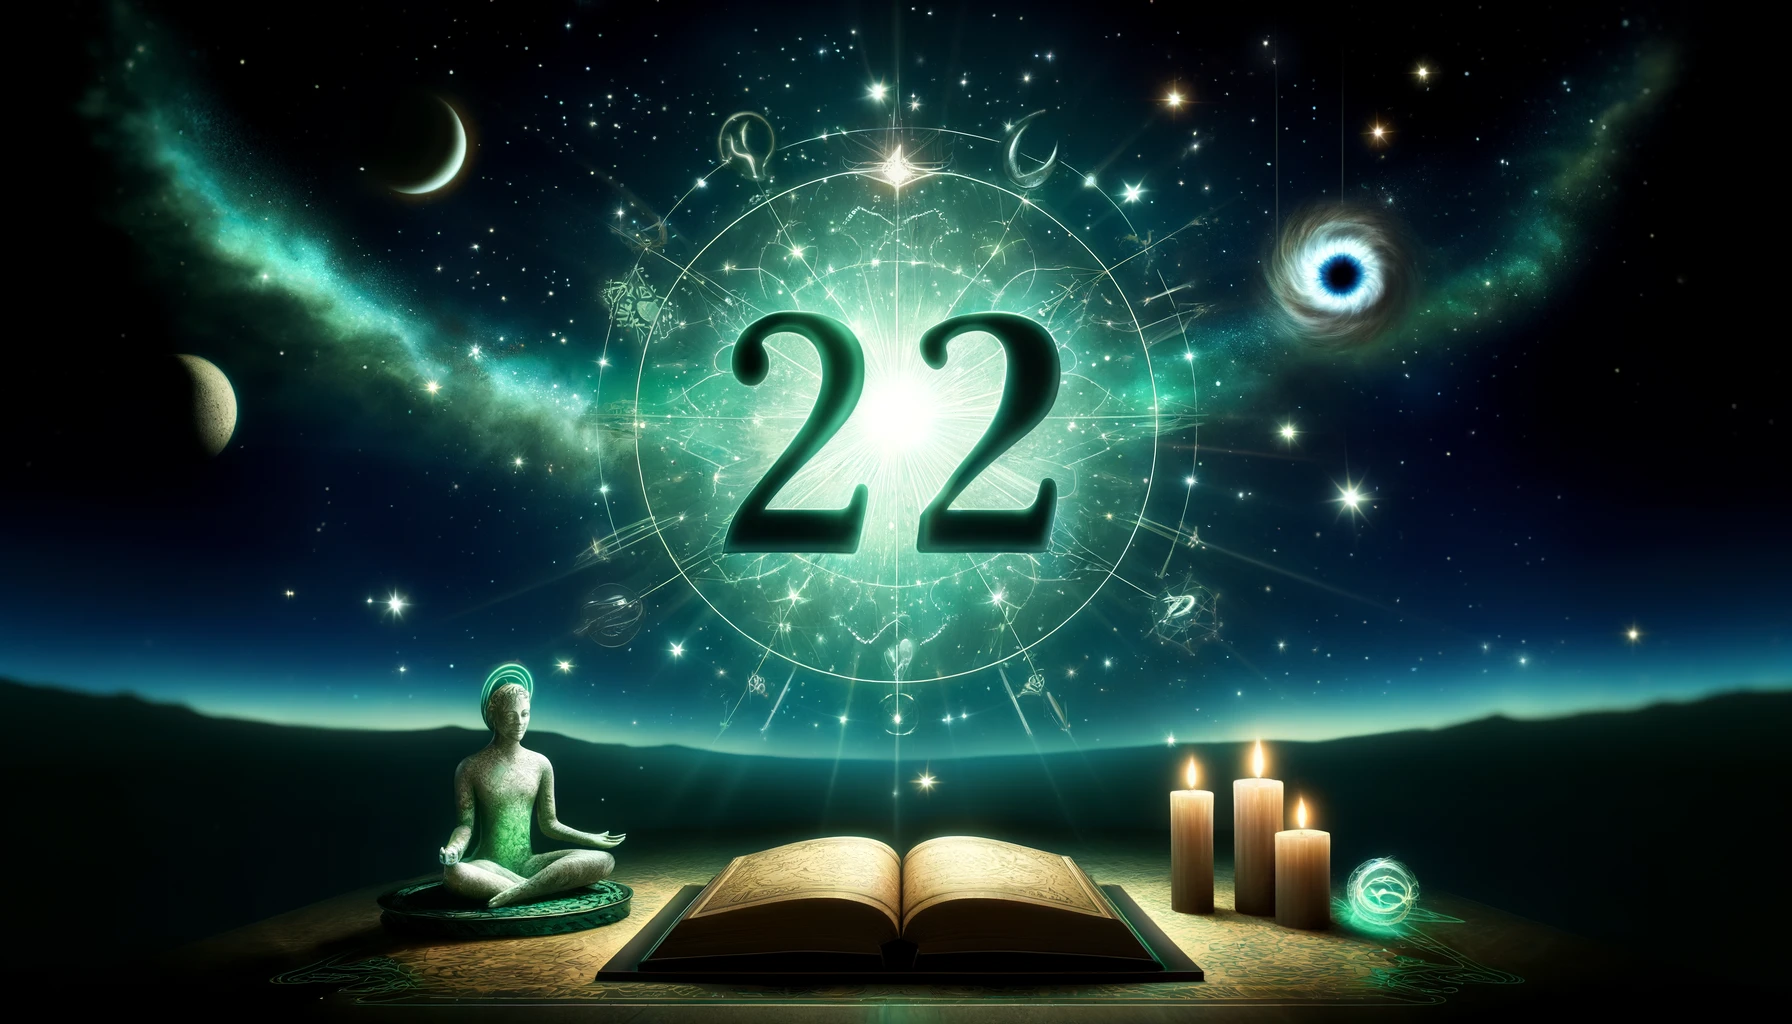 This image emphasizes the power and significance of the master number 22, with the number glowing brightly in a starry night sky, surrounded by mystical symbols.